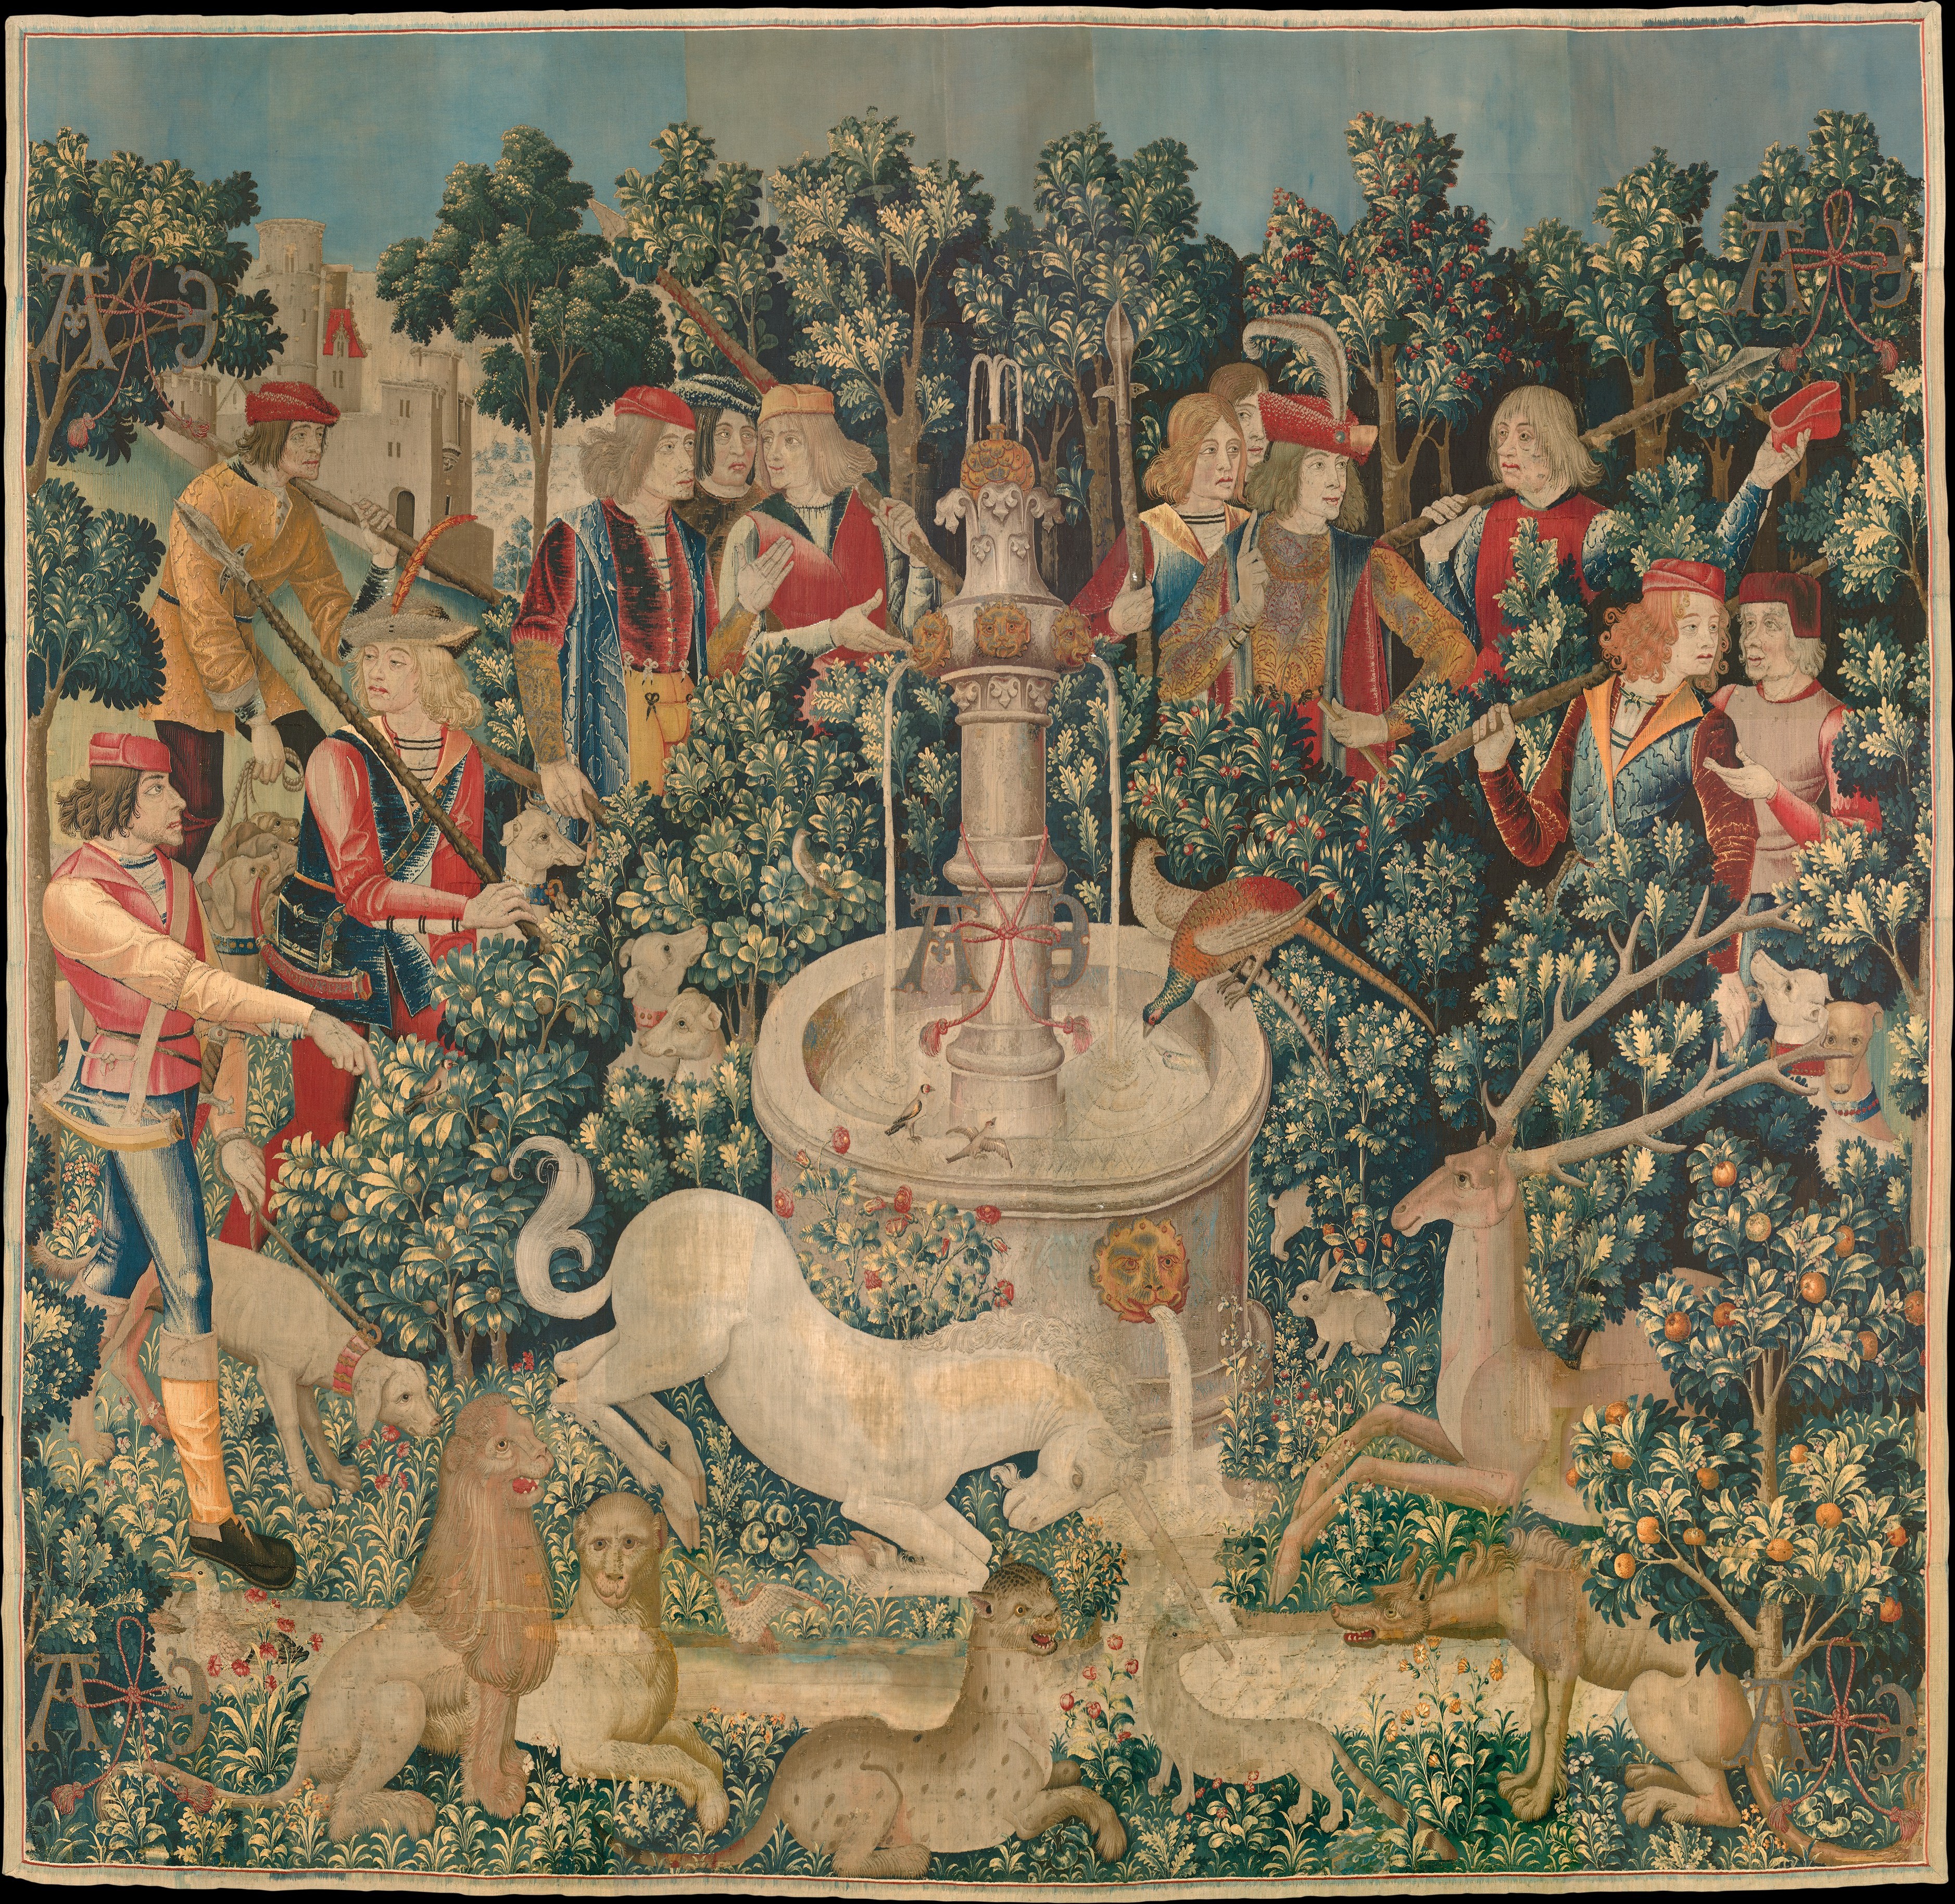 An image from the Unicorn Tapestries.